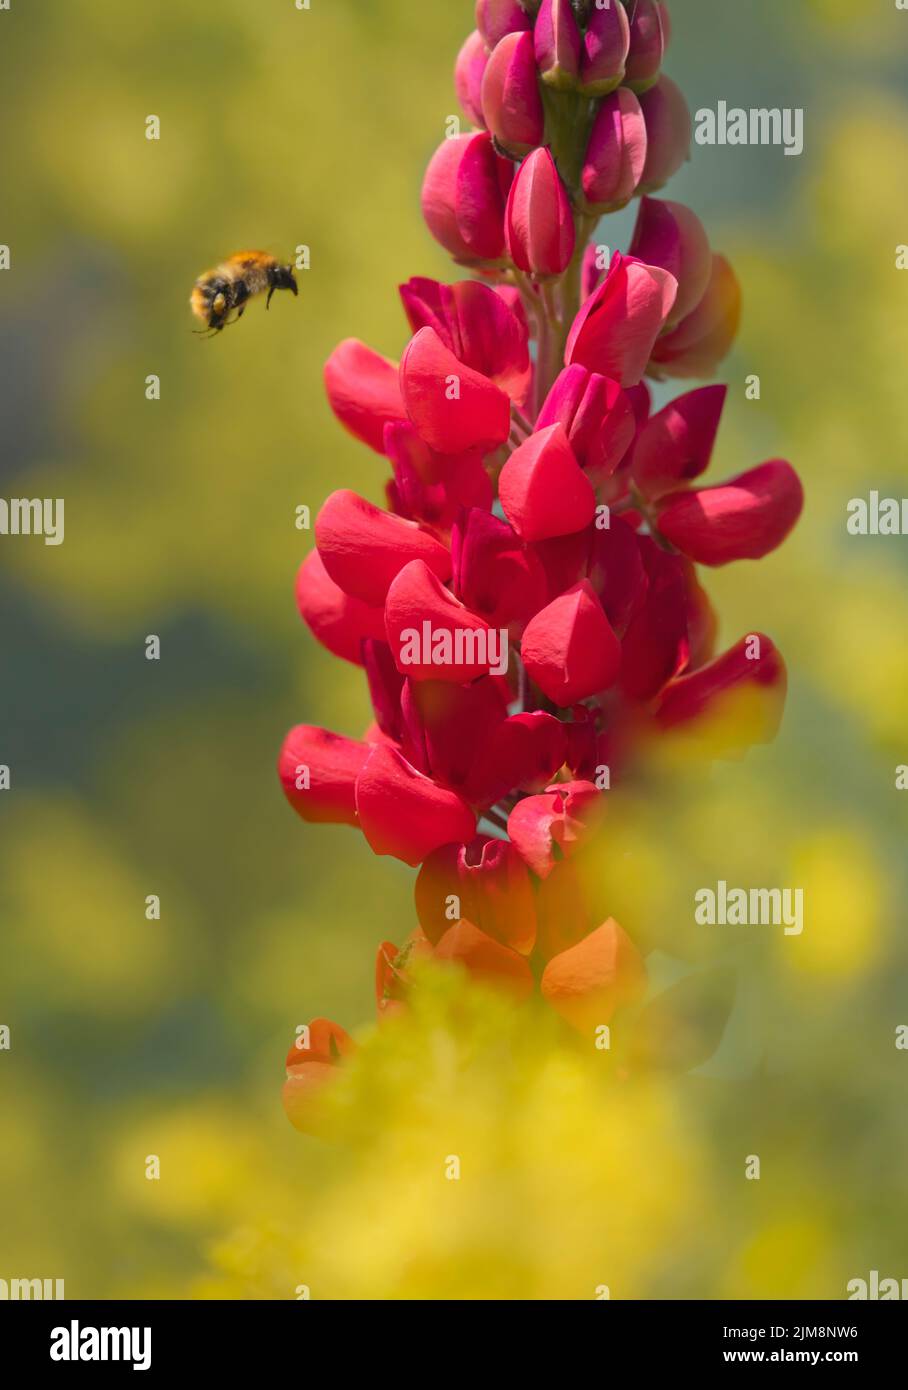 A Honeybee in flight as it approaches a bright red Lupin flower which is surrounded by out of focus yellow flowers Stock Photo